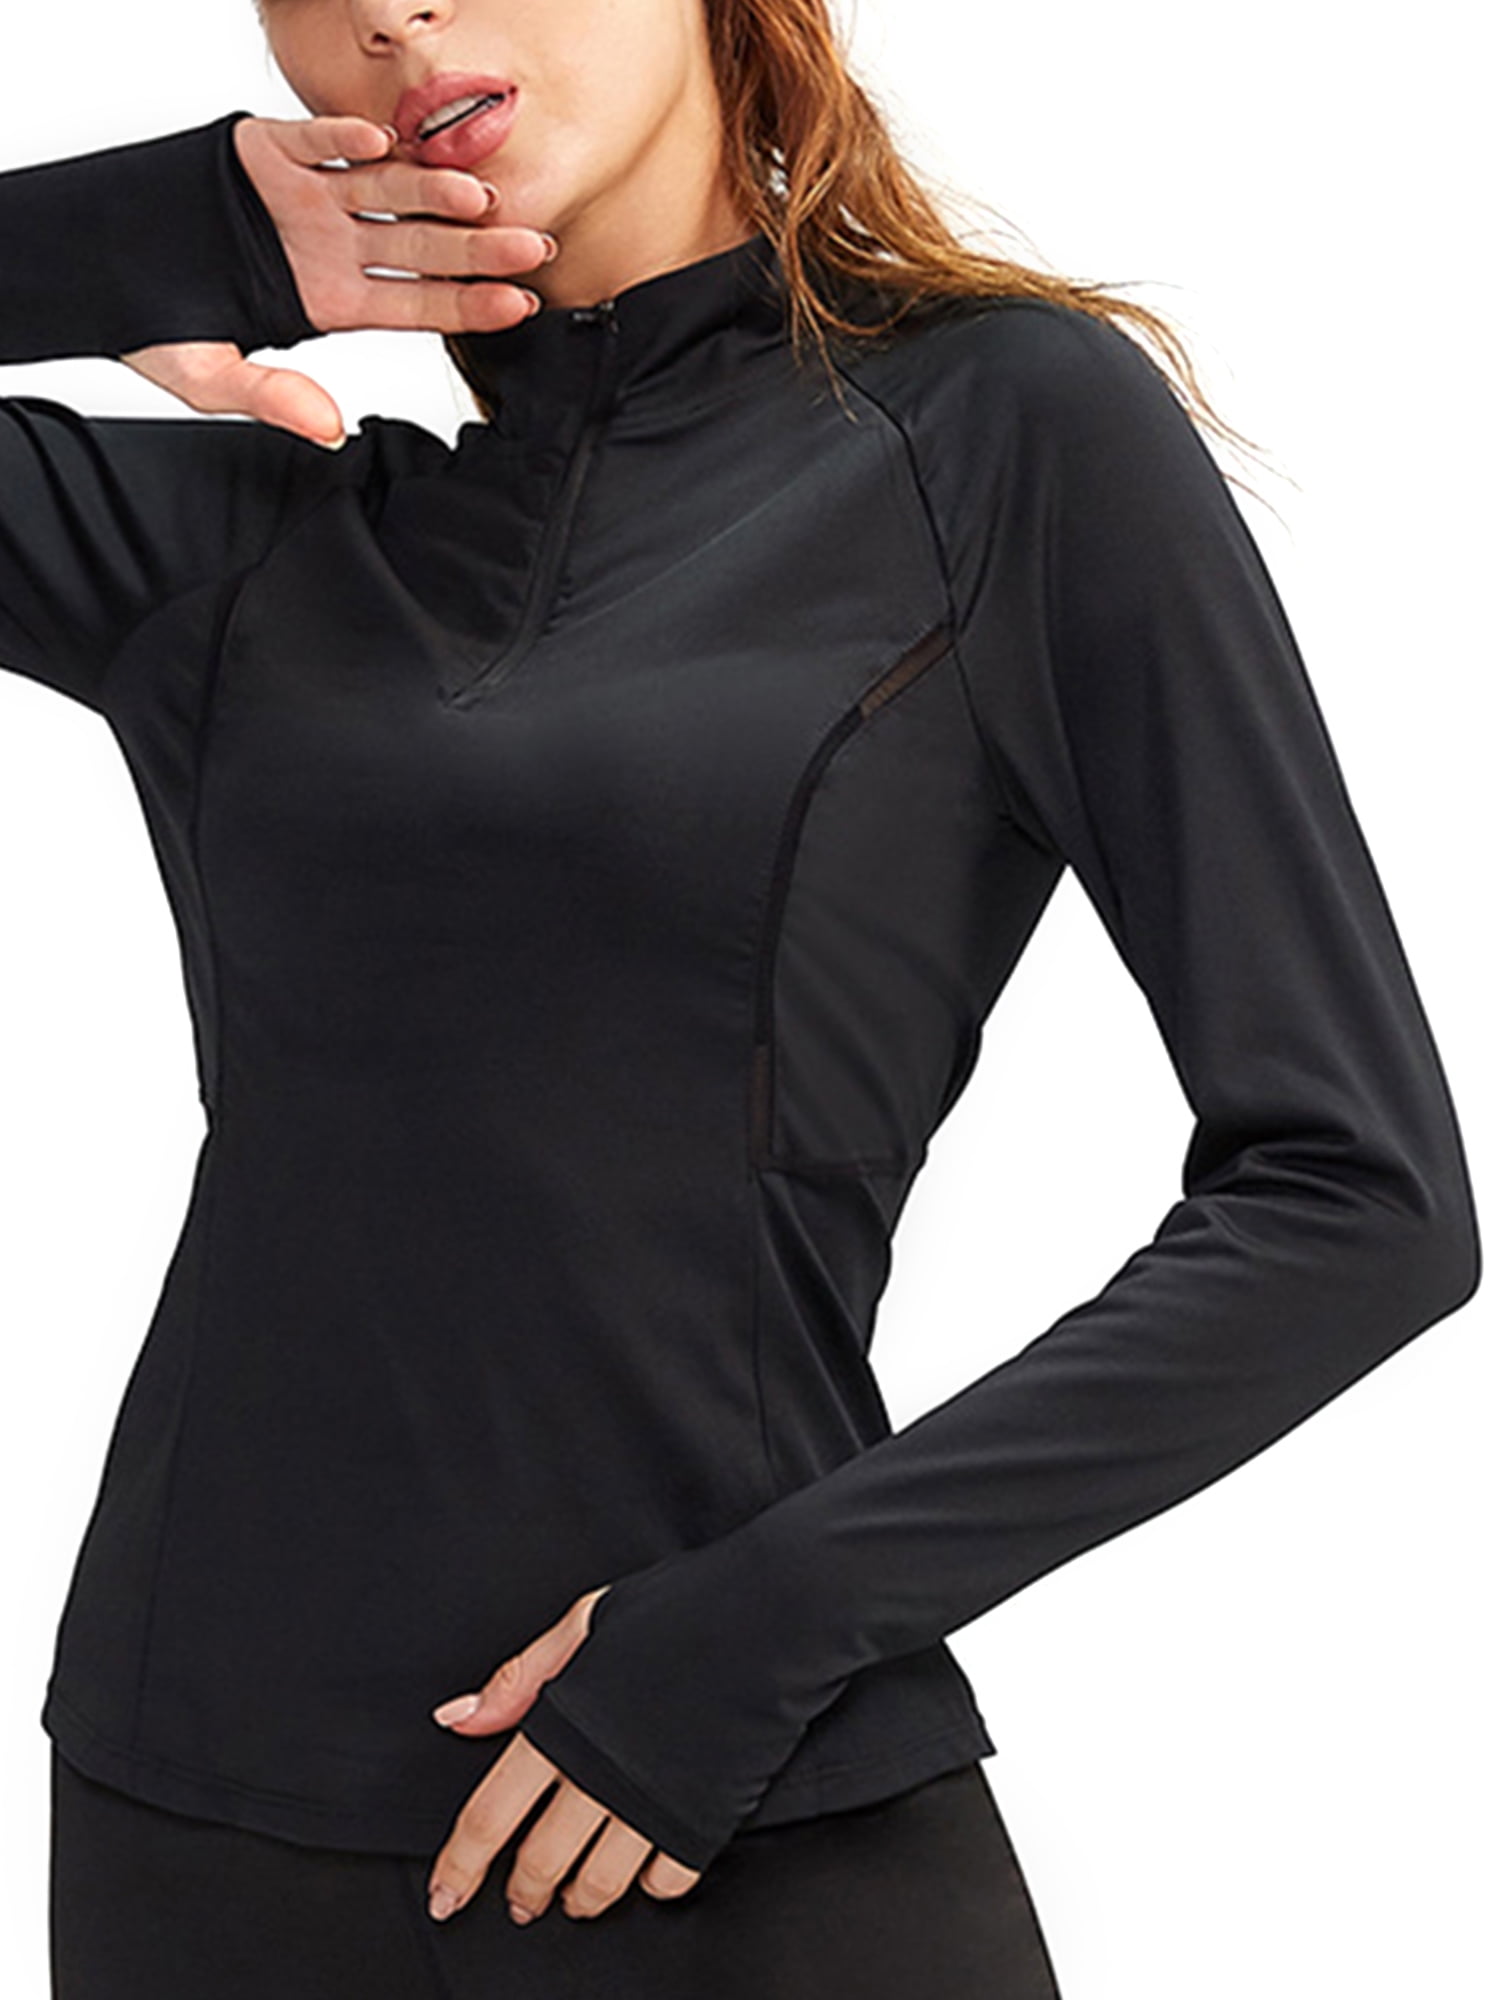 Women Long Sleeve Yoga Shirts Zip Up Banded Workout Top with Thumb 